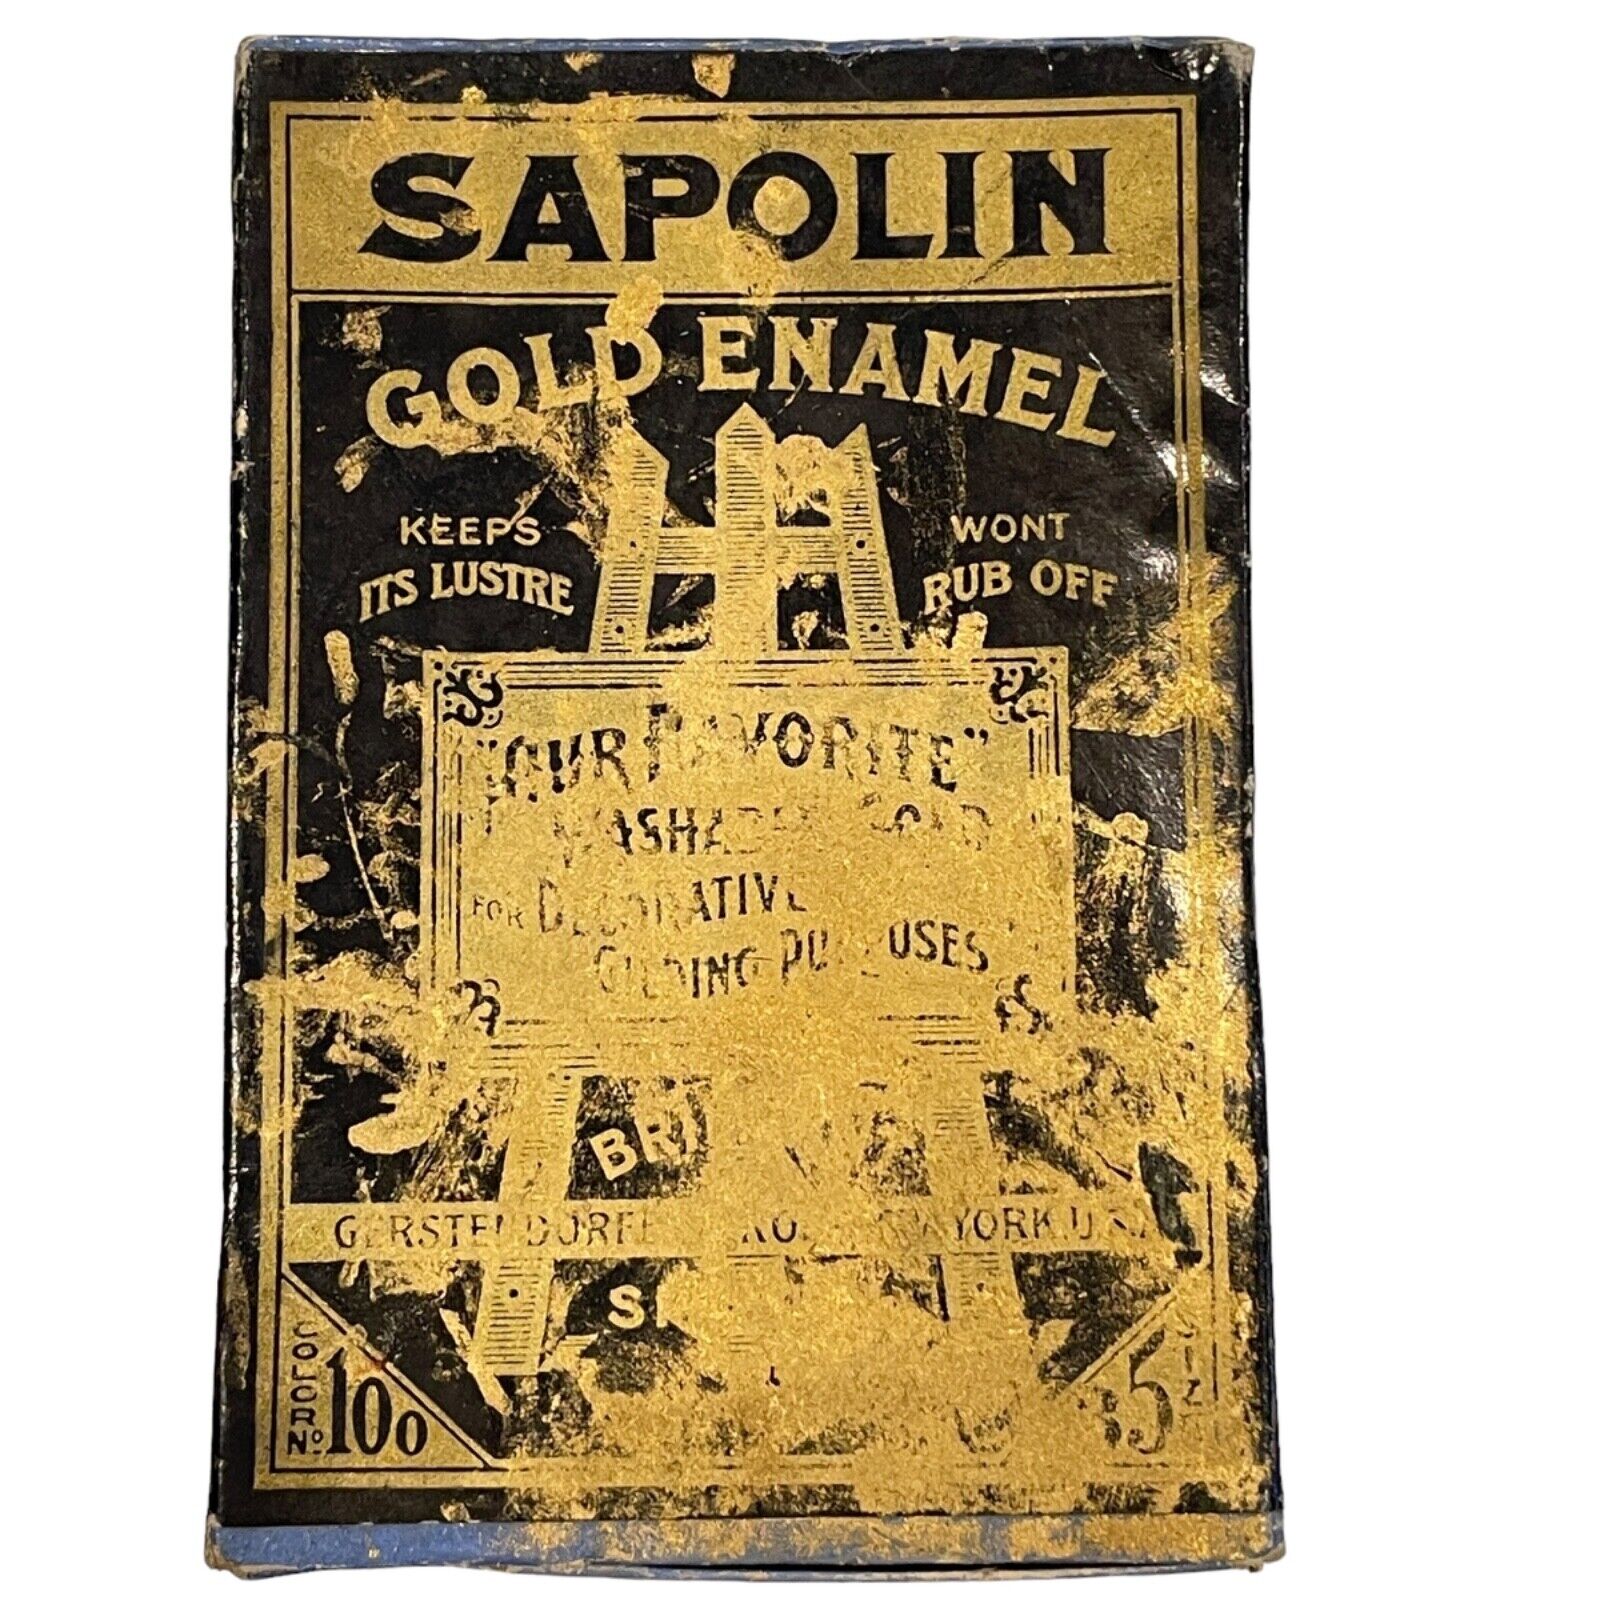 Antique Sapolin Gold Enamel Kit in Box Gerstendorfer Brothers NYC 1922 Collector